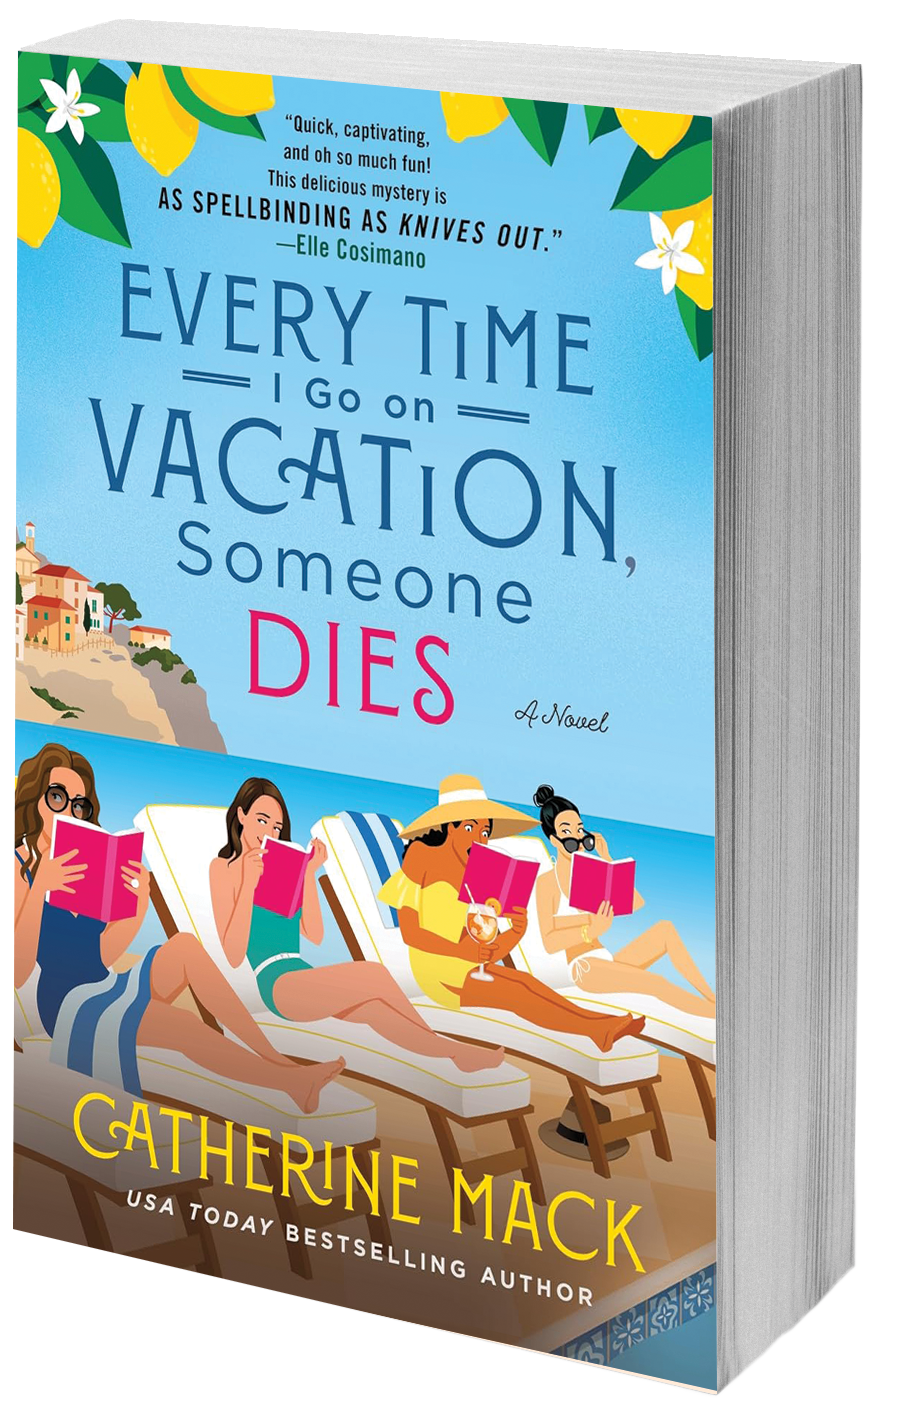 Every time I go on vacation, someone dies